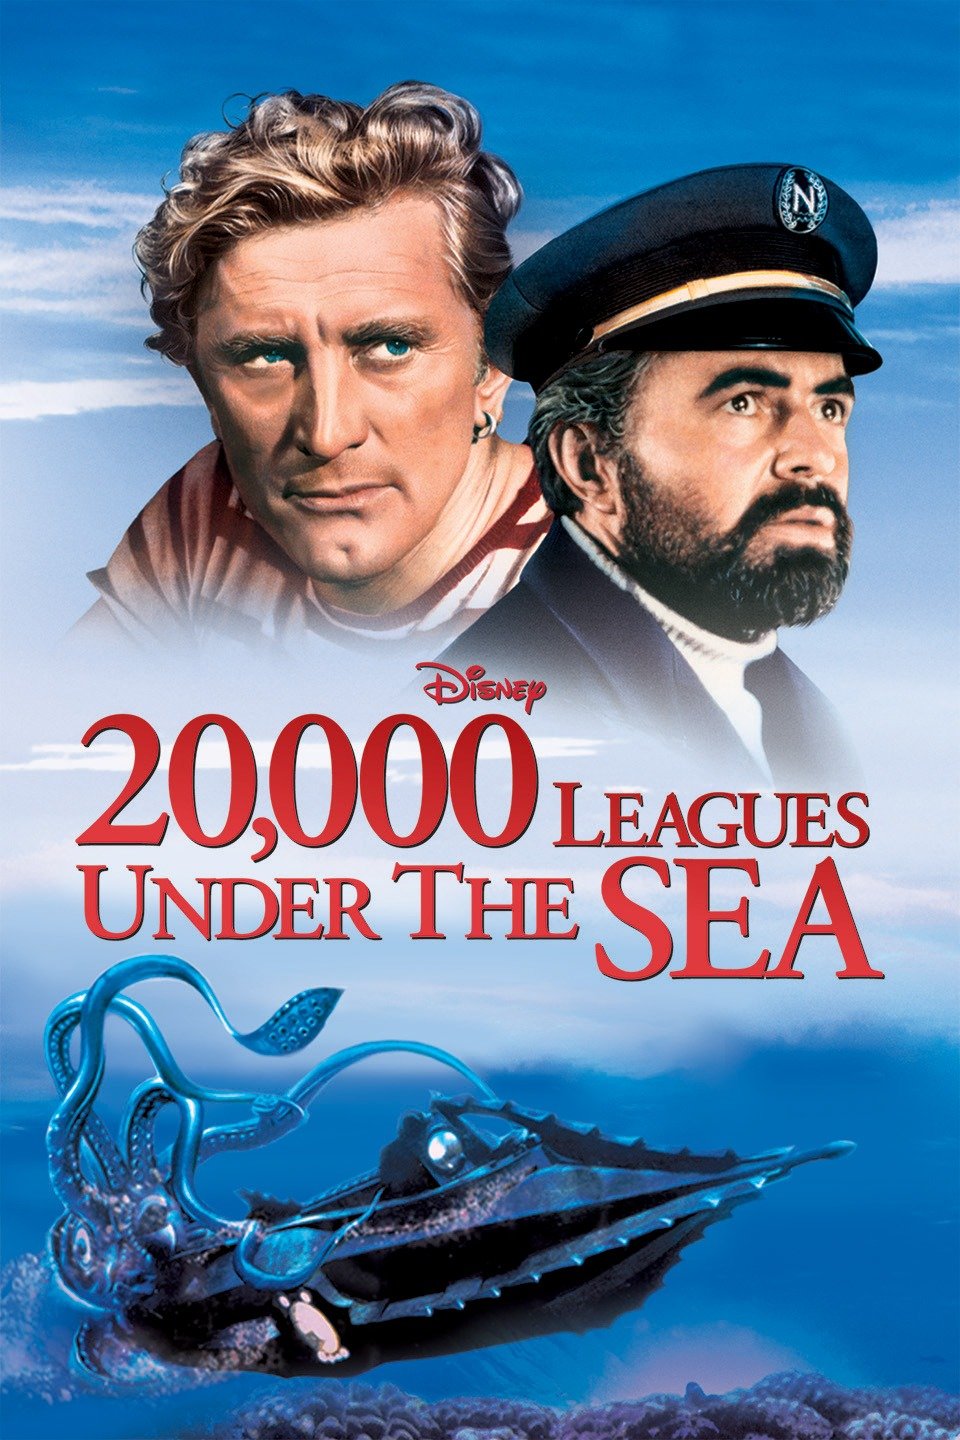 20,000 Leagues Under the Sea DVD